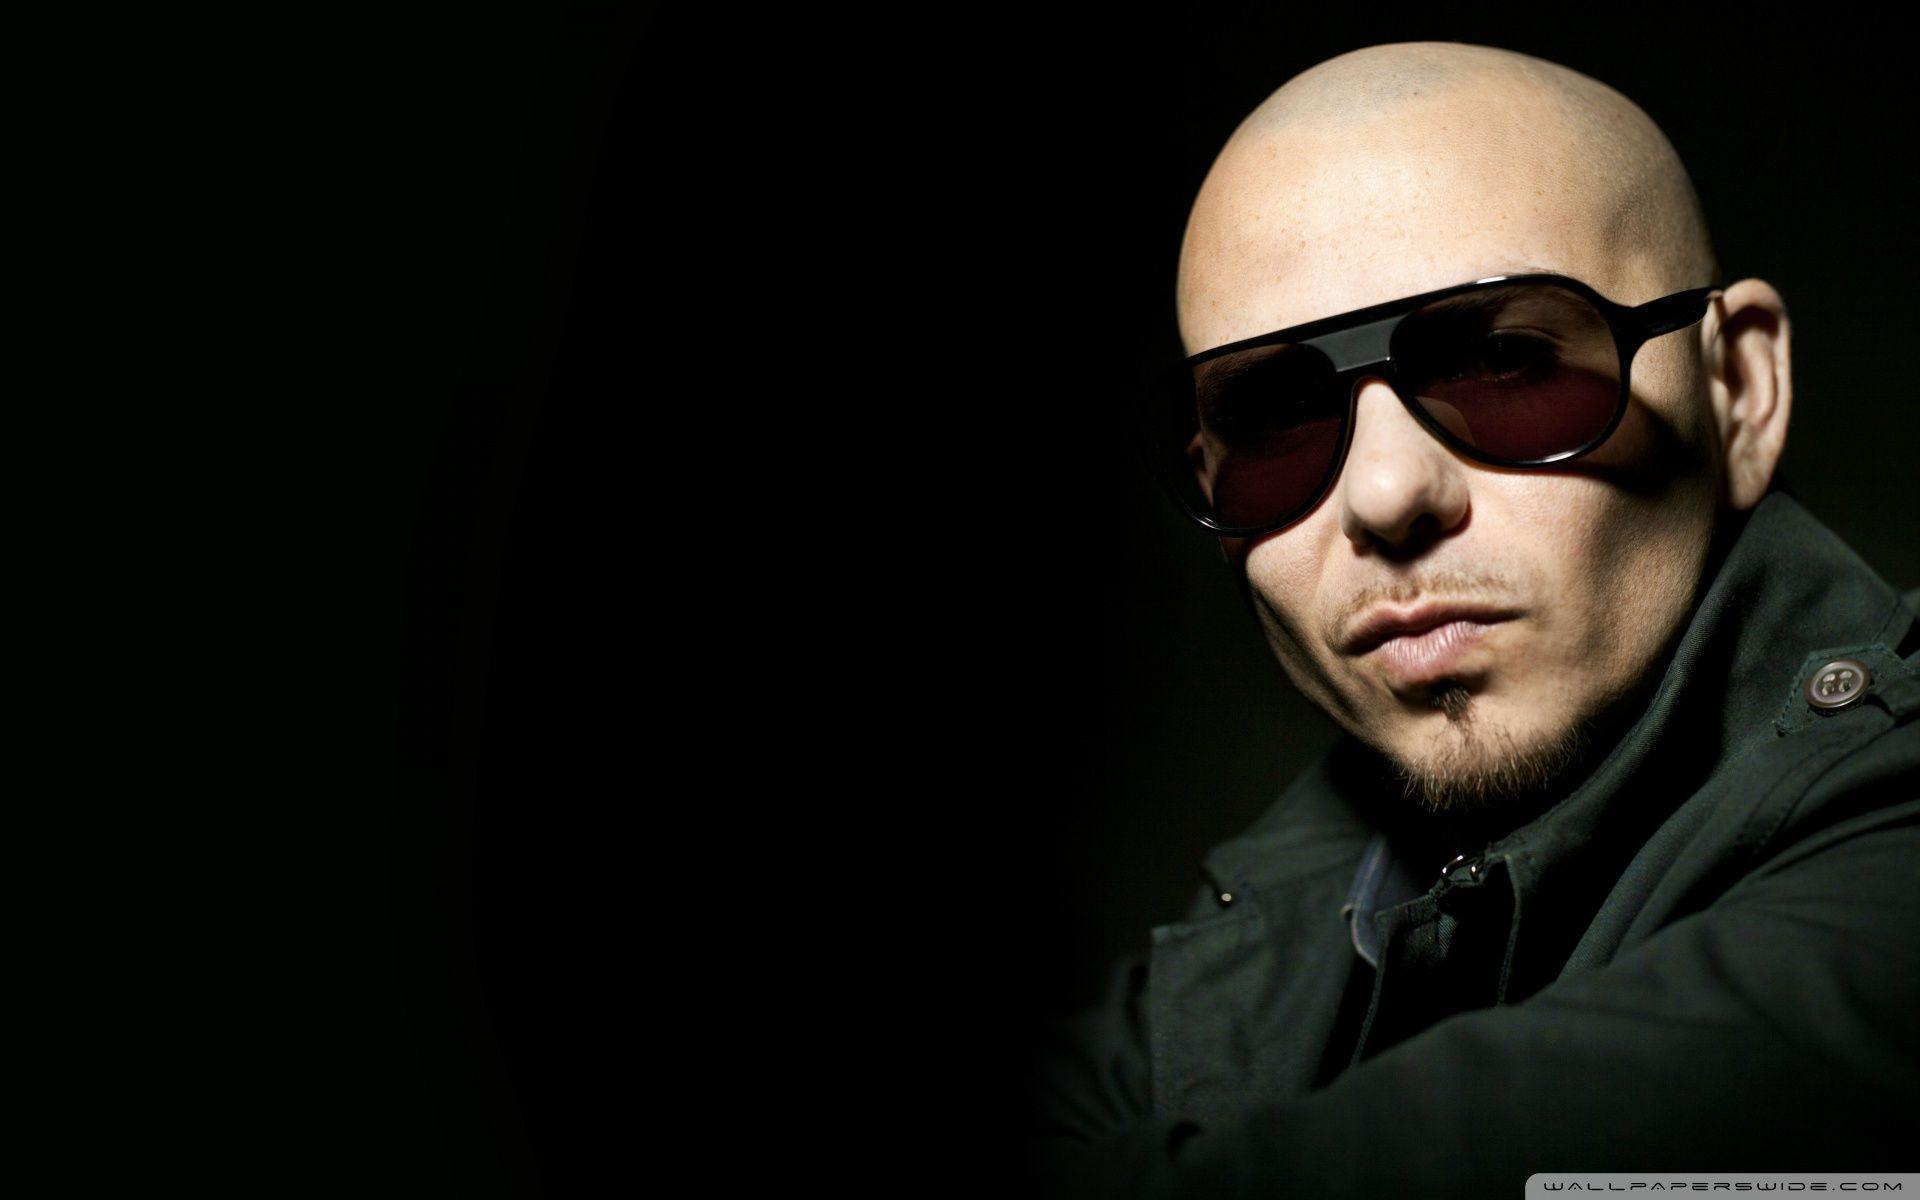 Pitbull Drops Another Banger with Flo Rida and LunchMoney Lewis